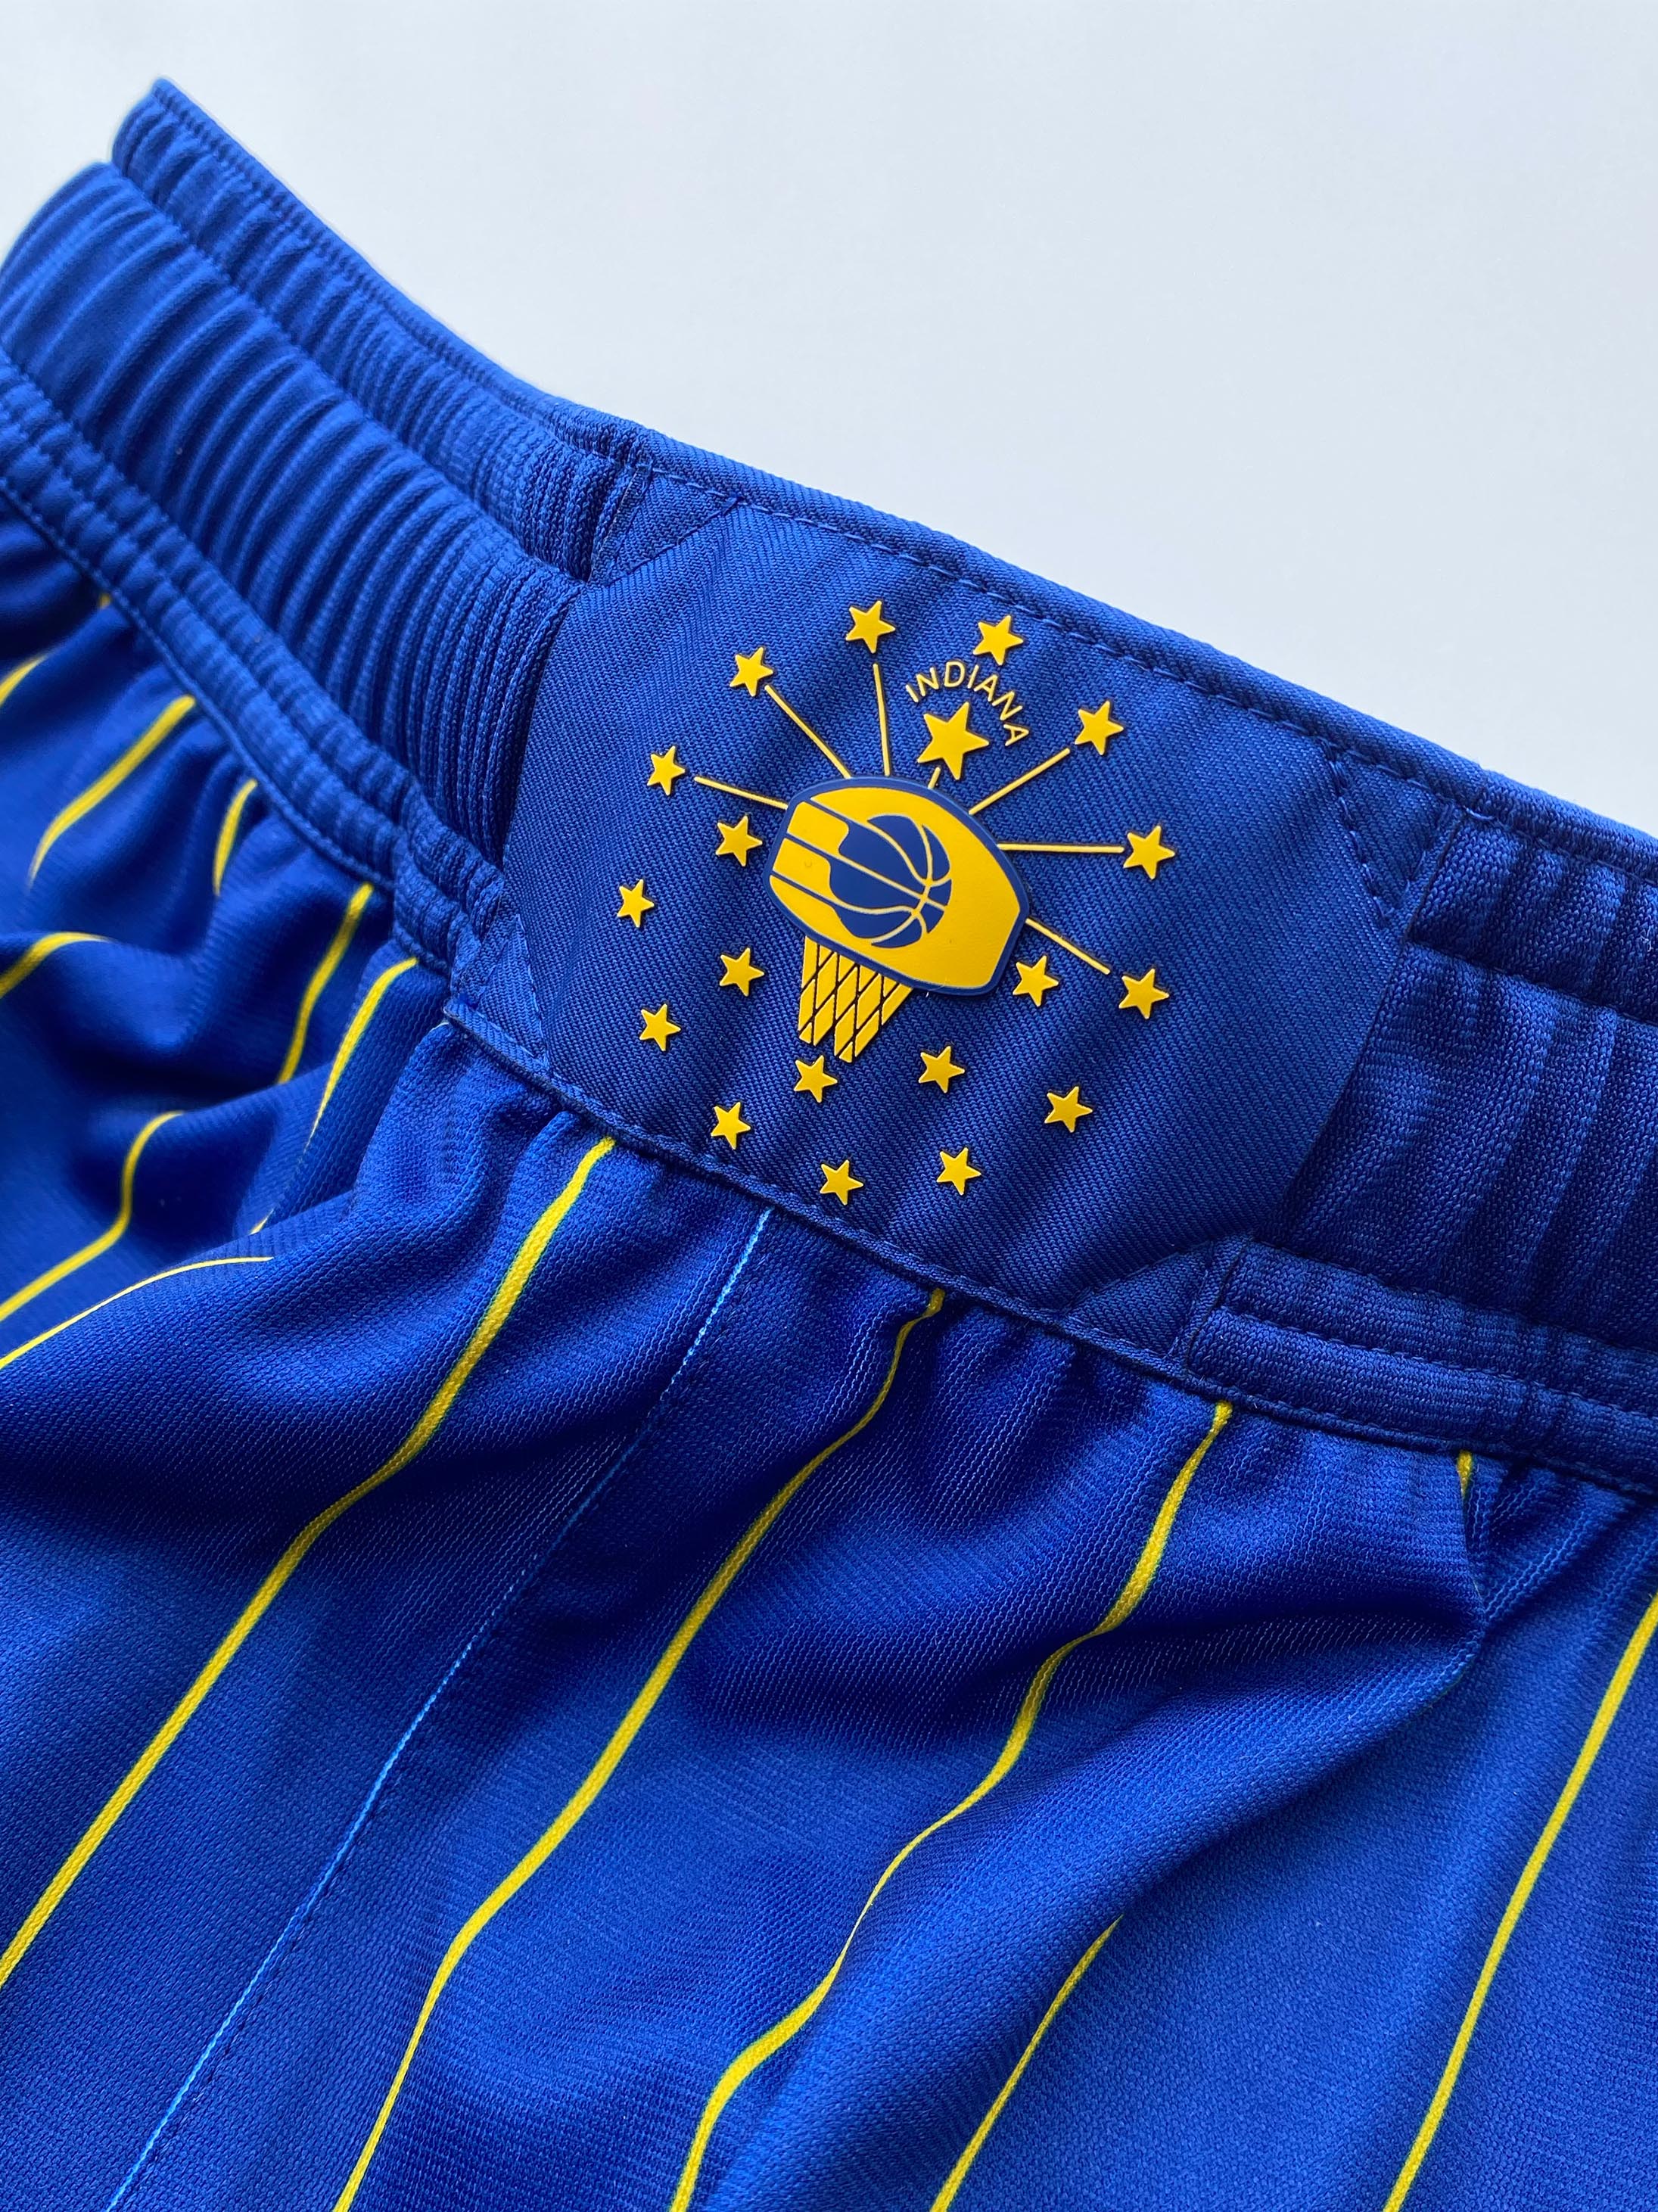 WRTV Indianapolis on X: The Indiana Pacers unveiled their City Edition  uniform for the 2020-21 season. The jersey's design features the Indiana  state flag's royal blue color, along with pinstripes the team